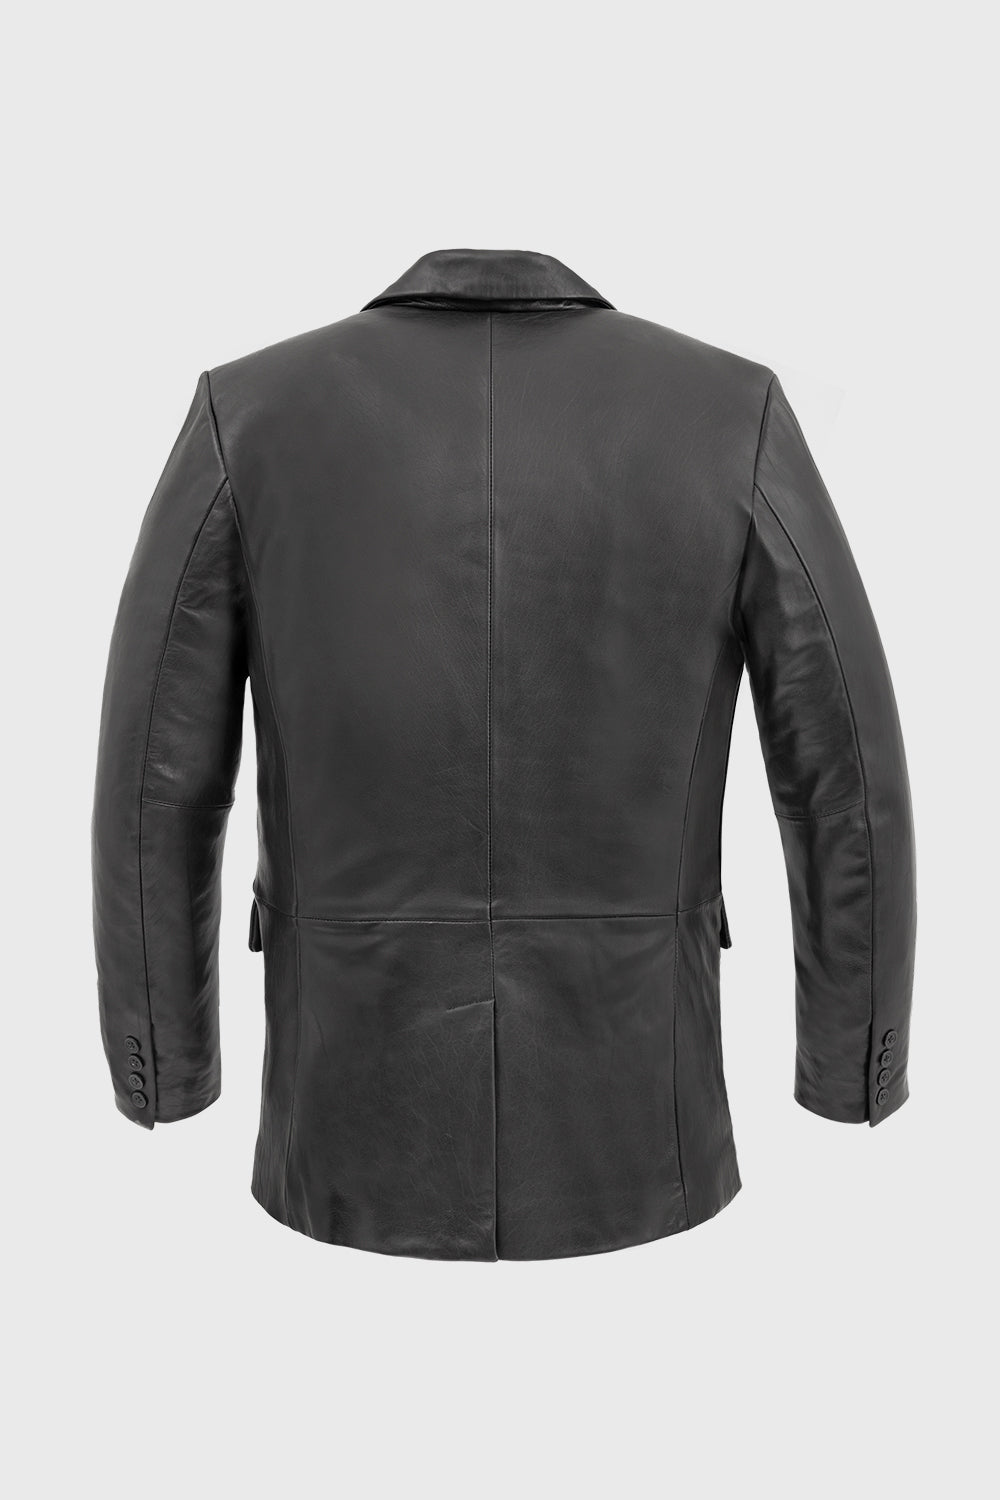 Marco - Extreme Biker Leather